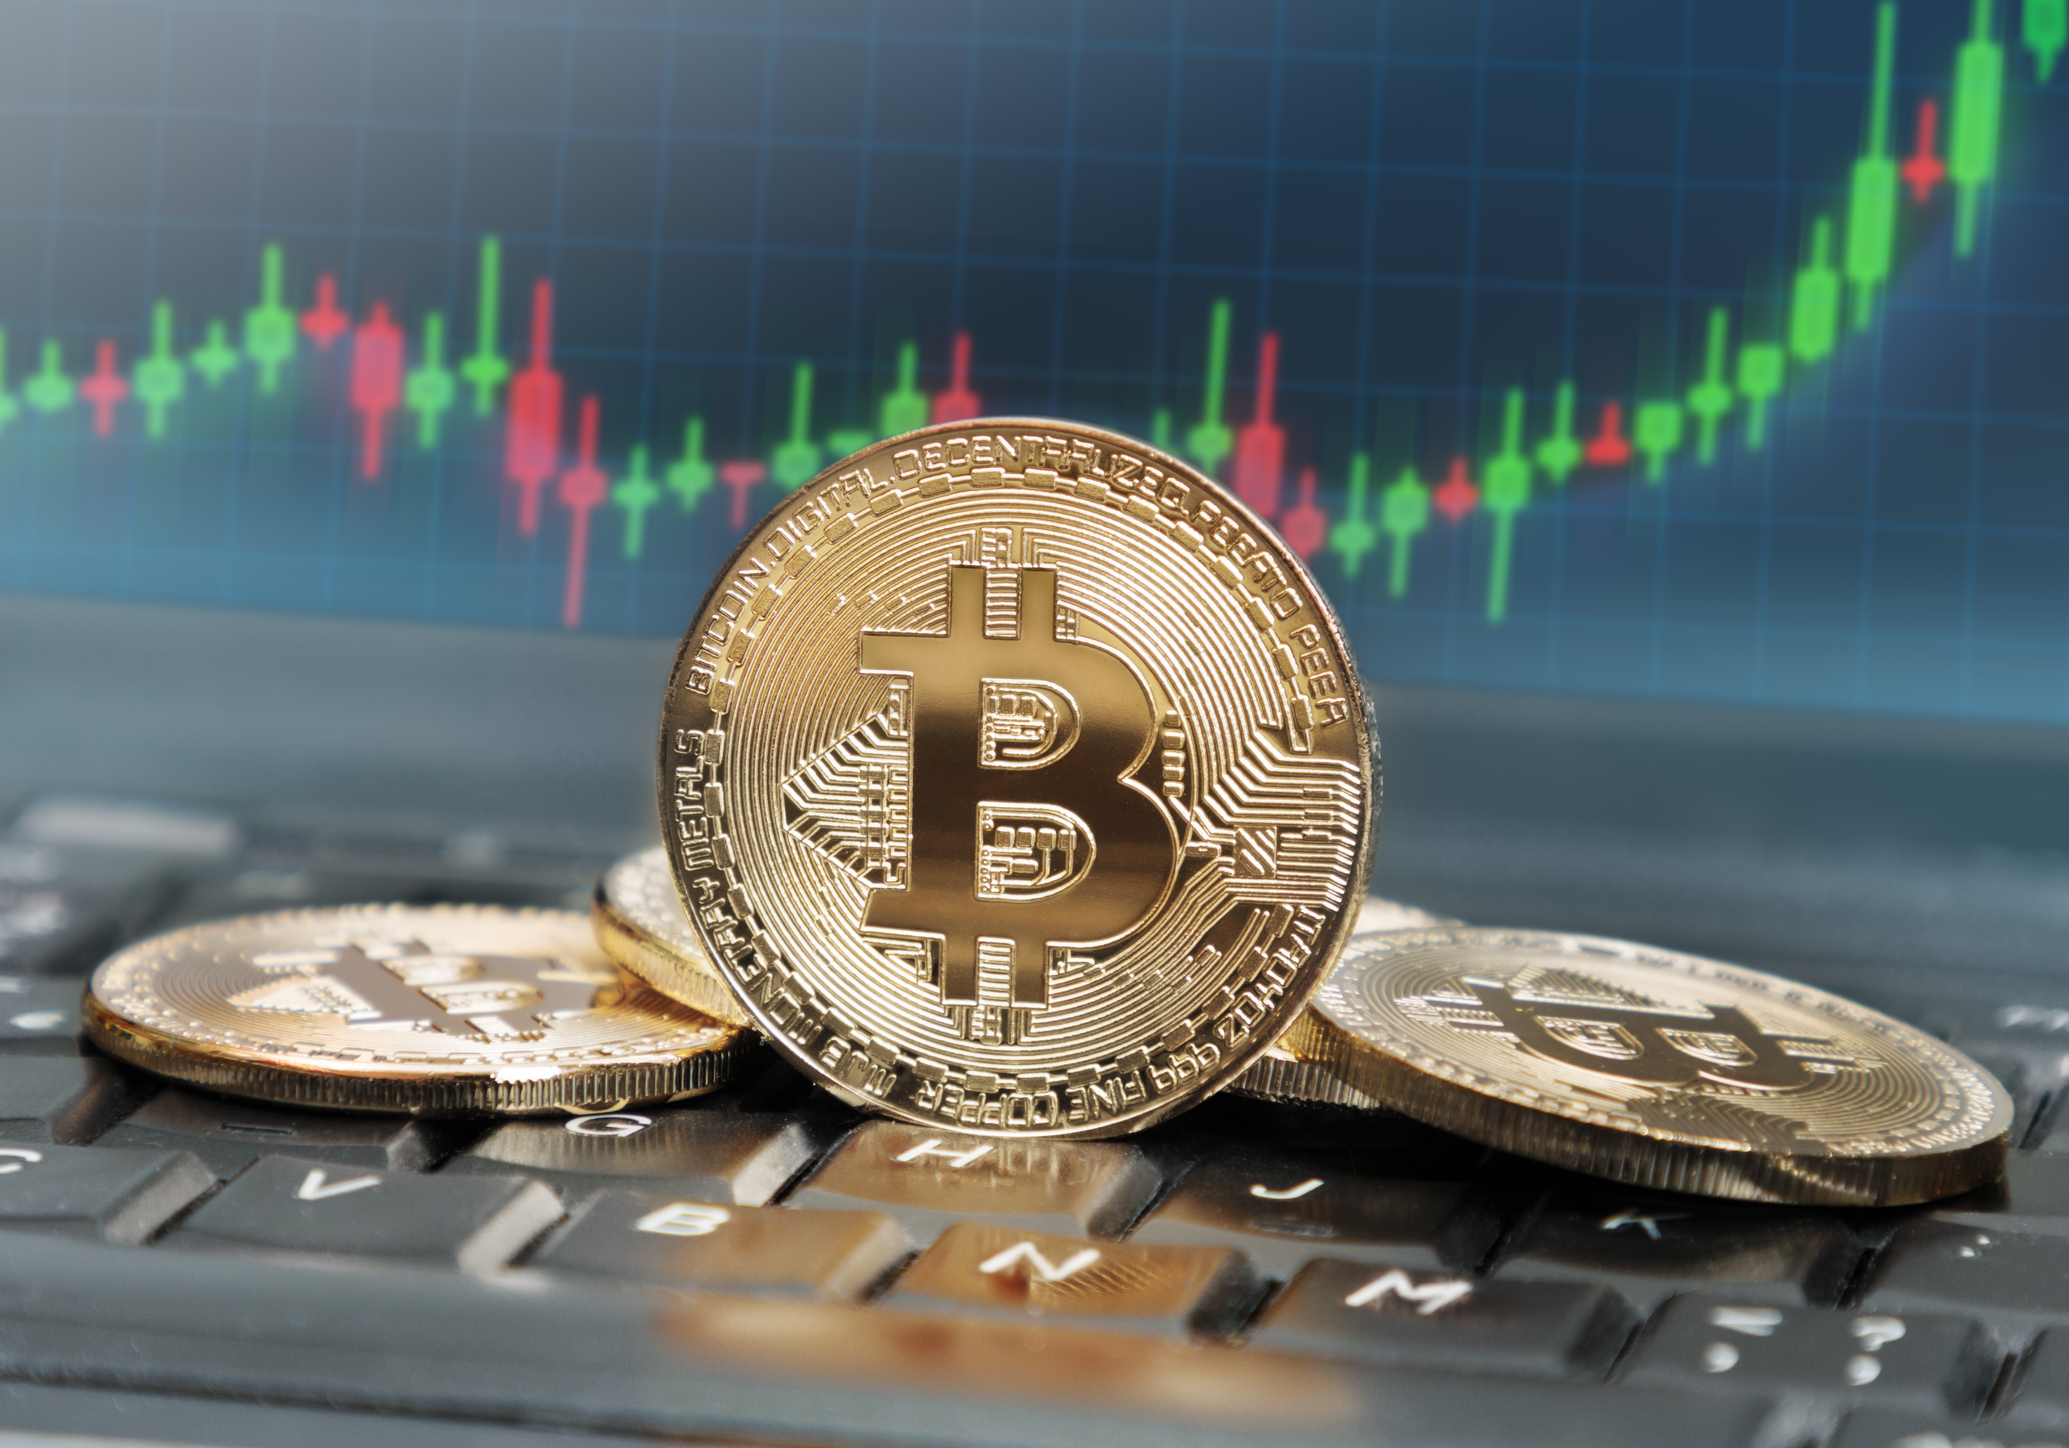 Bitcoins on keyboard with screen in the background displaying rising trend of its value